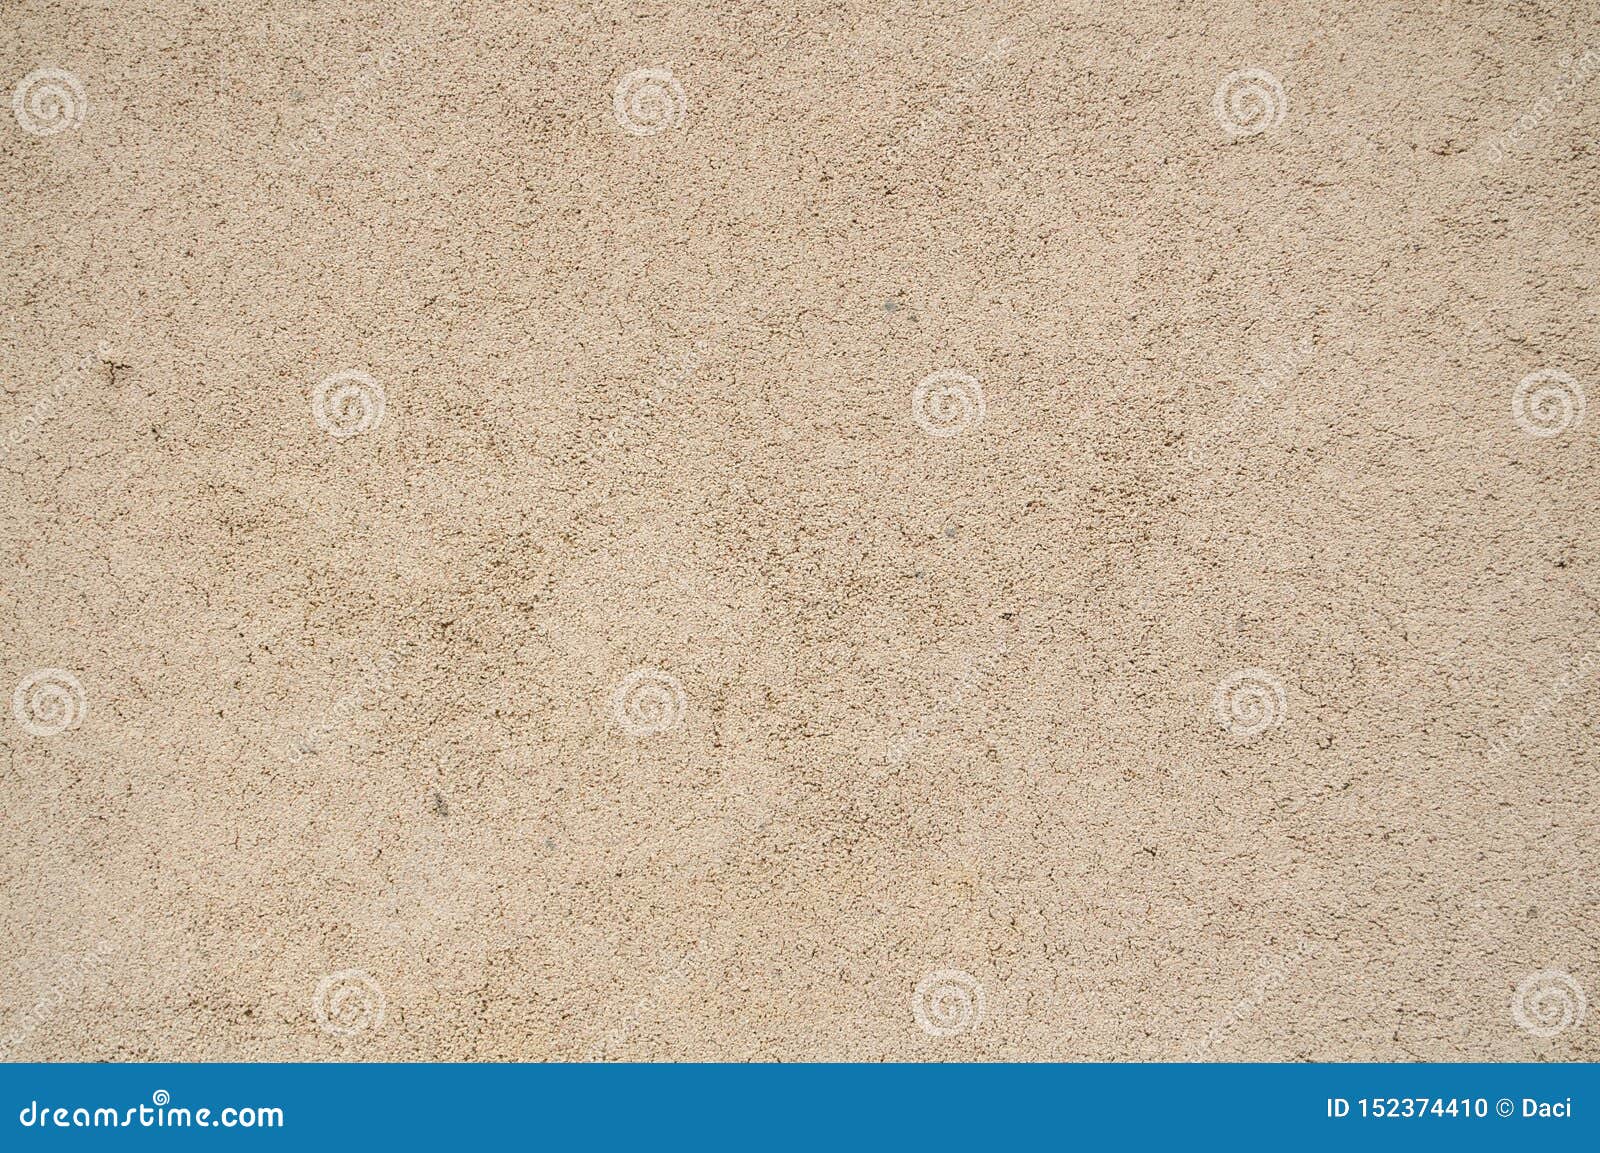 Sand Cement Wall Texture for Background and Design Art Work Stock Photo ...